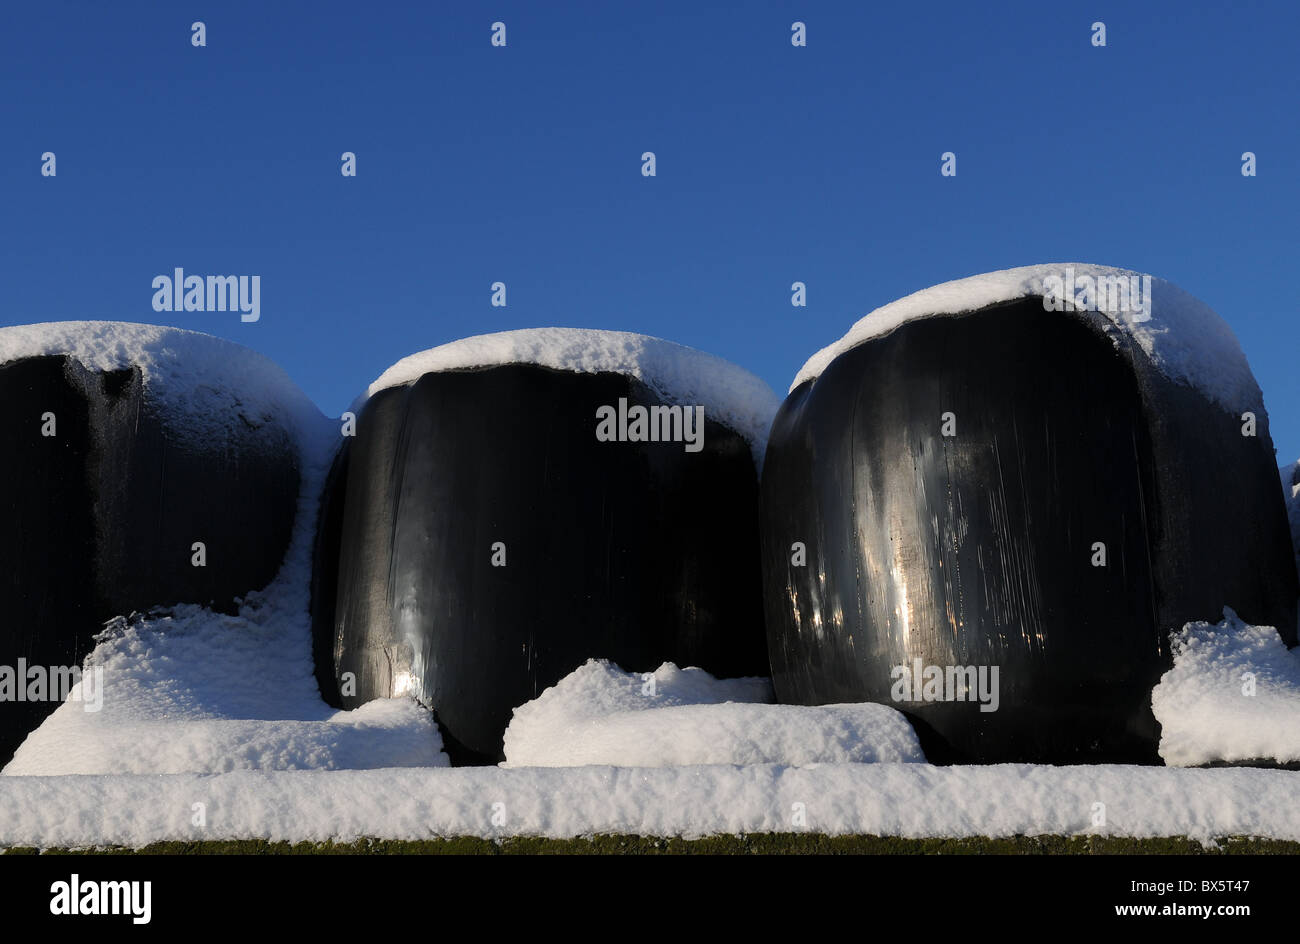 Hay bales covered in snow Stock Photo